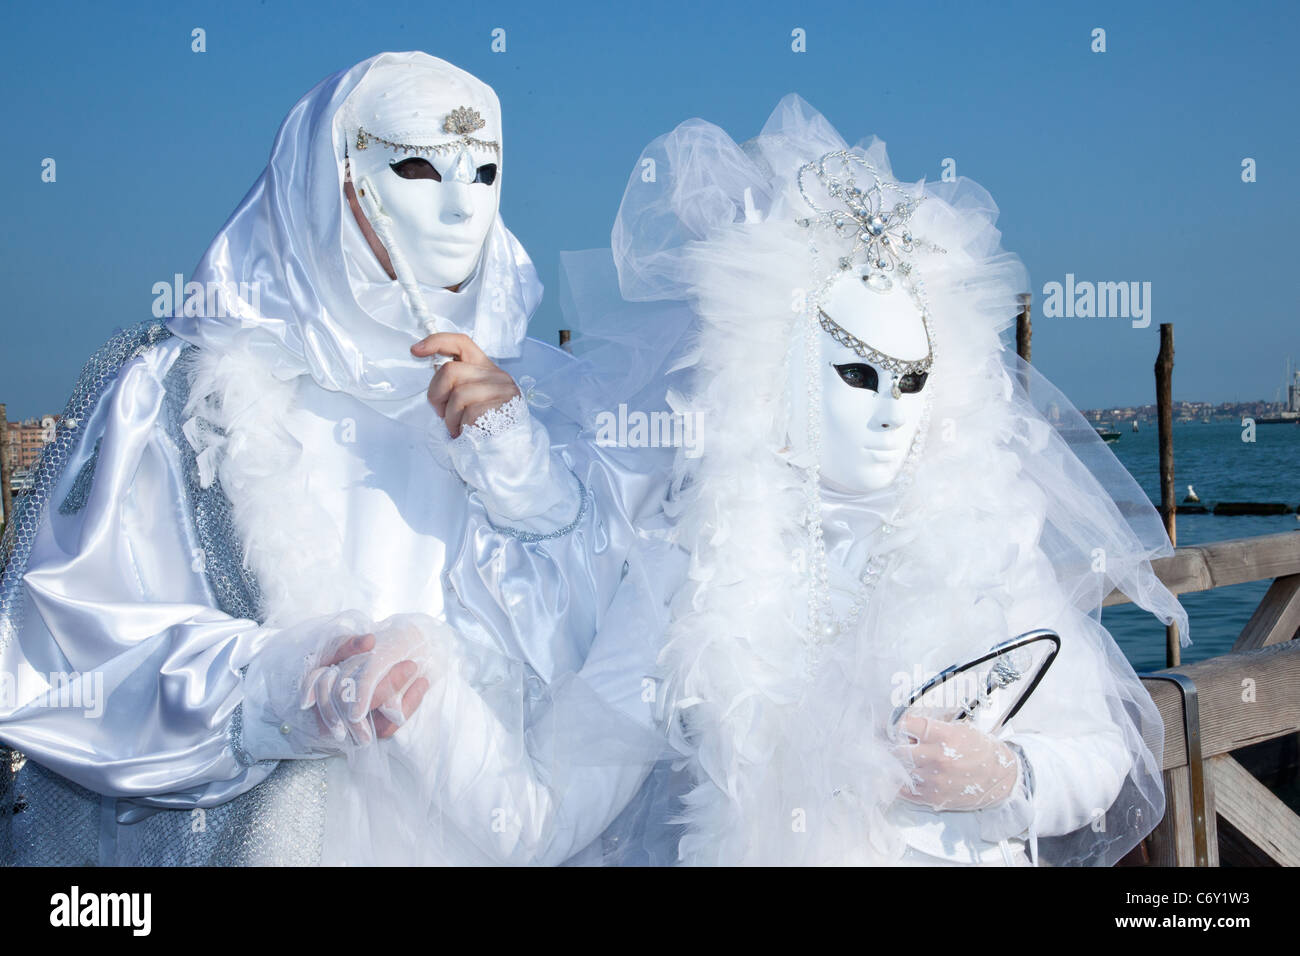 Two people in costume during Carnivale 2011 in Venice Italy Stock Photo